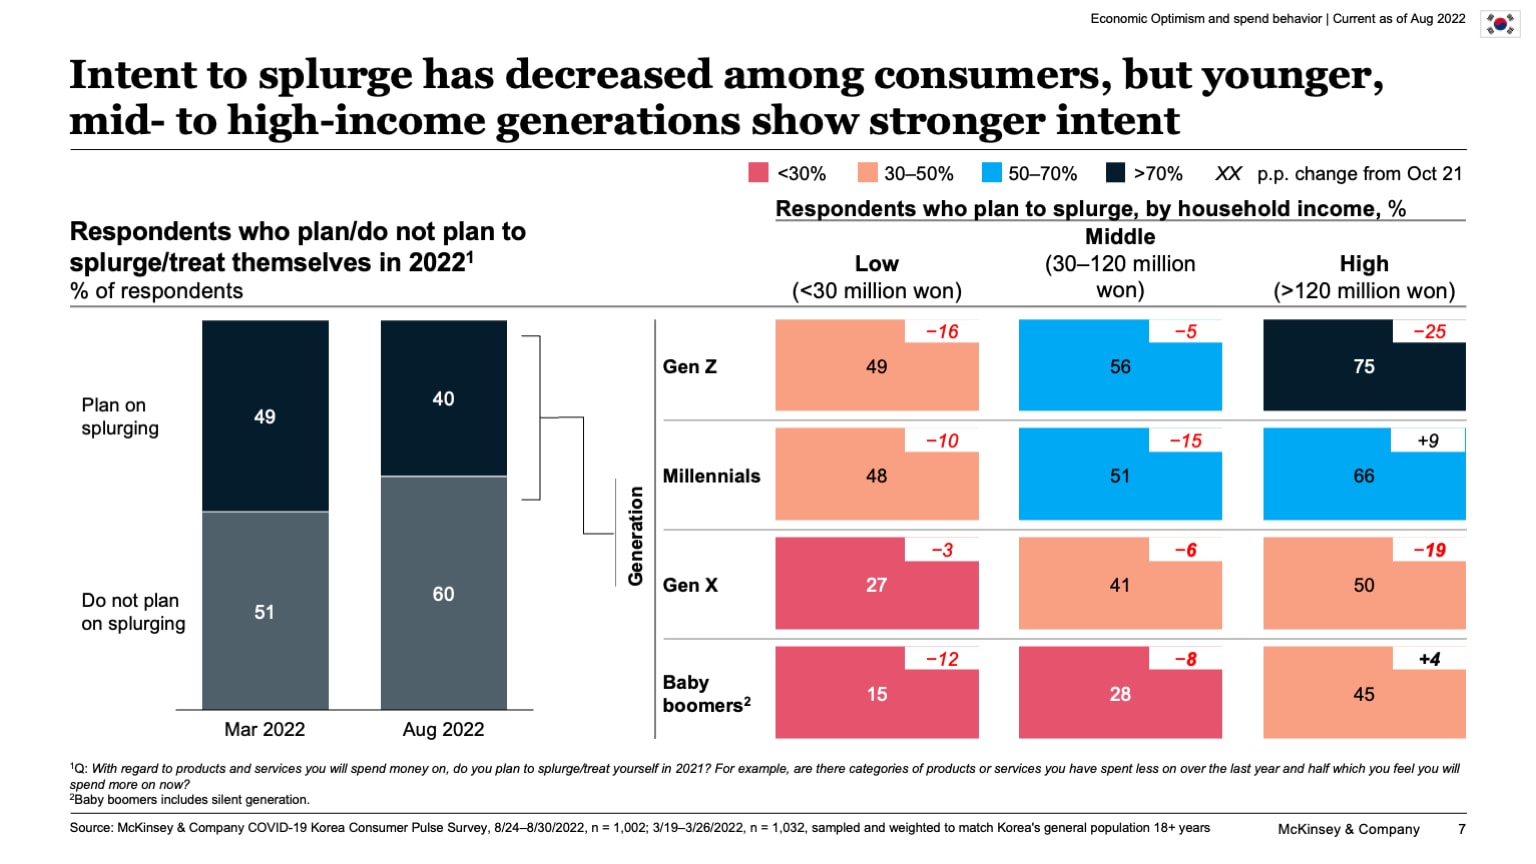 Intent to splurge has decreased among consumers, but younger, mid- to high-income generations show stronger intent